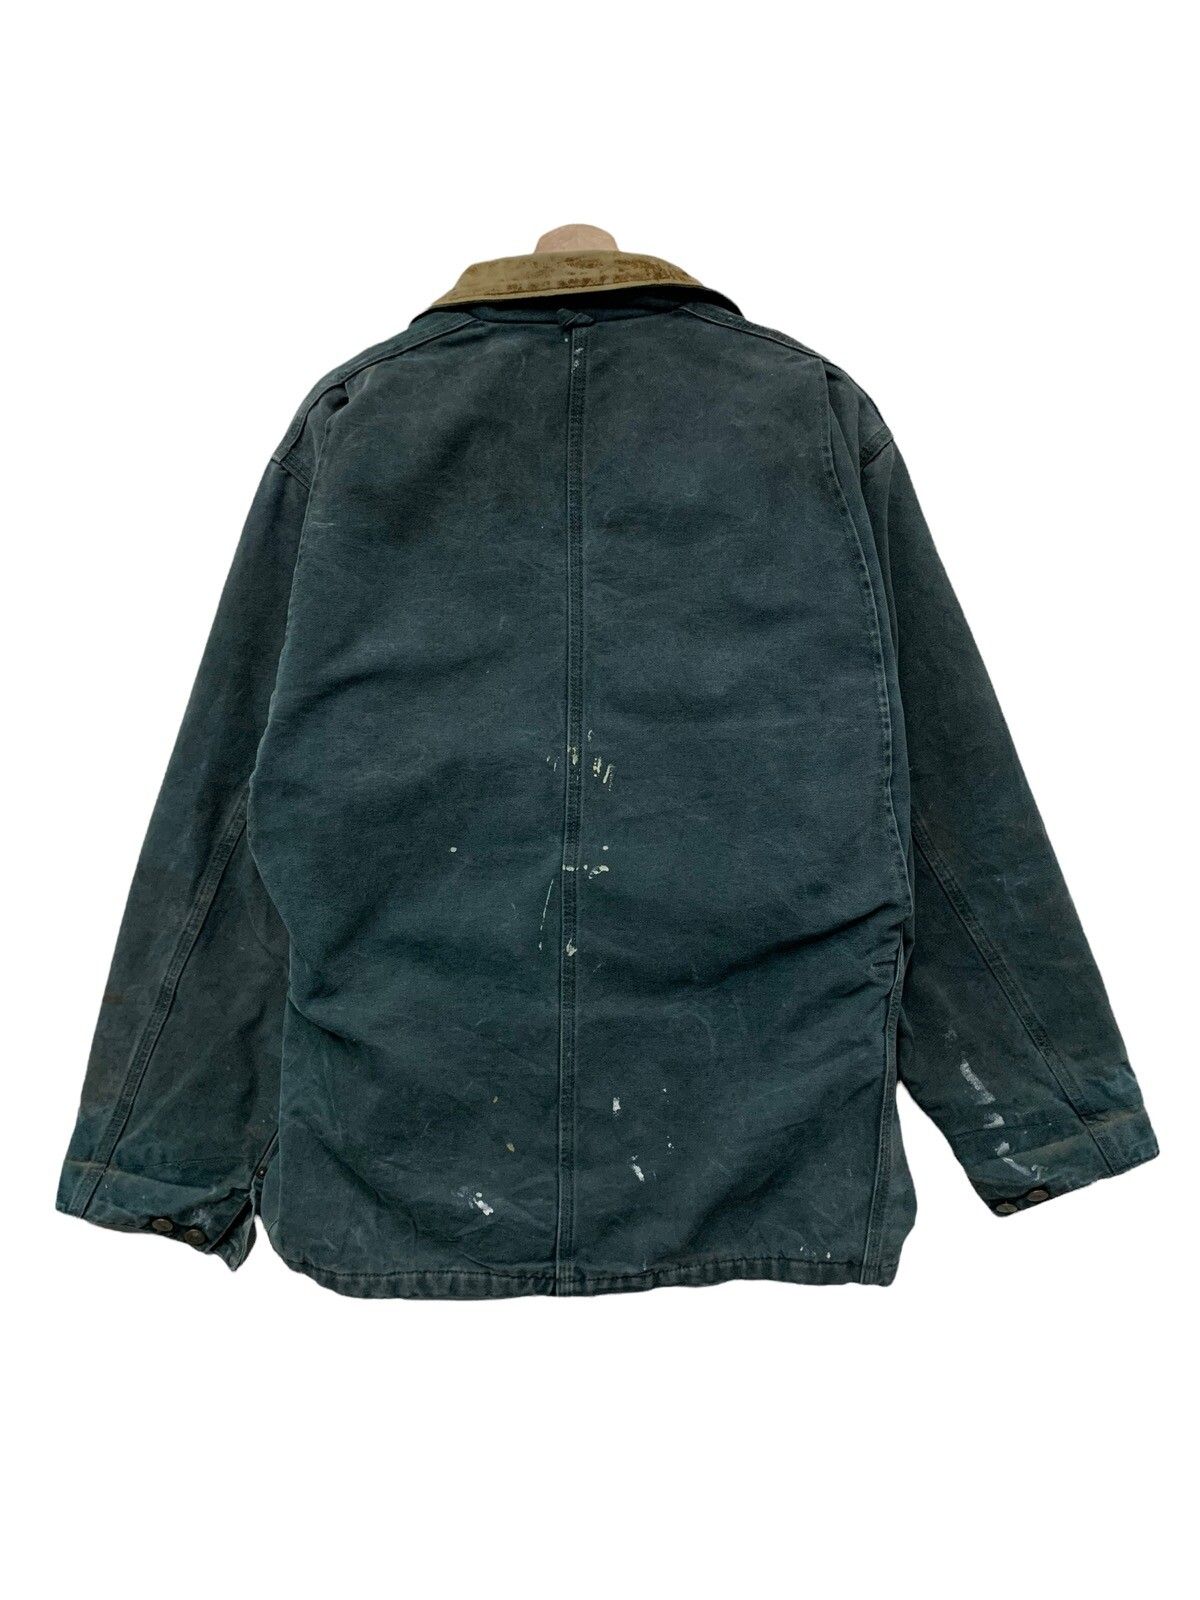 🔥DISTRESSED CARHARTT WORKERS CHORE JACKETS - 6